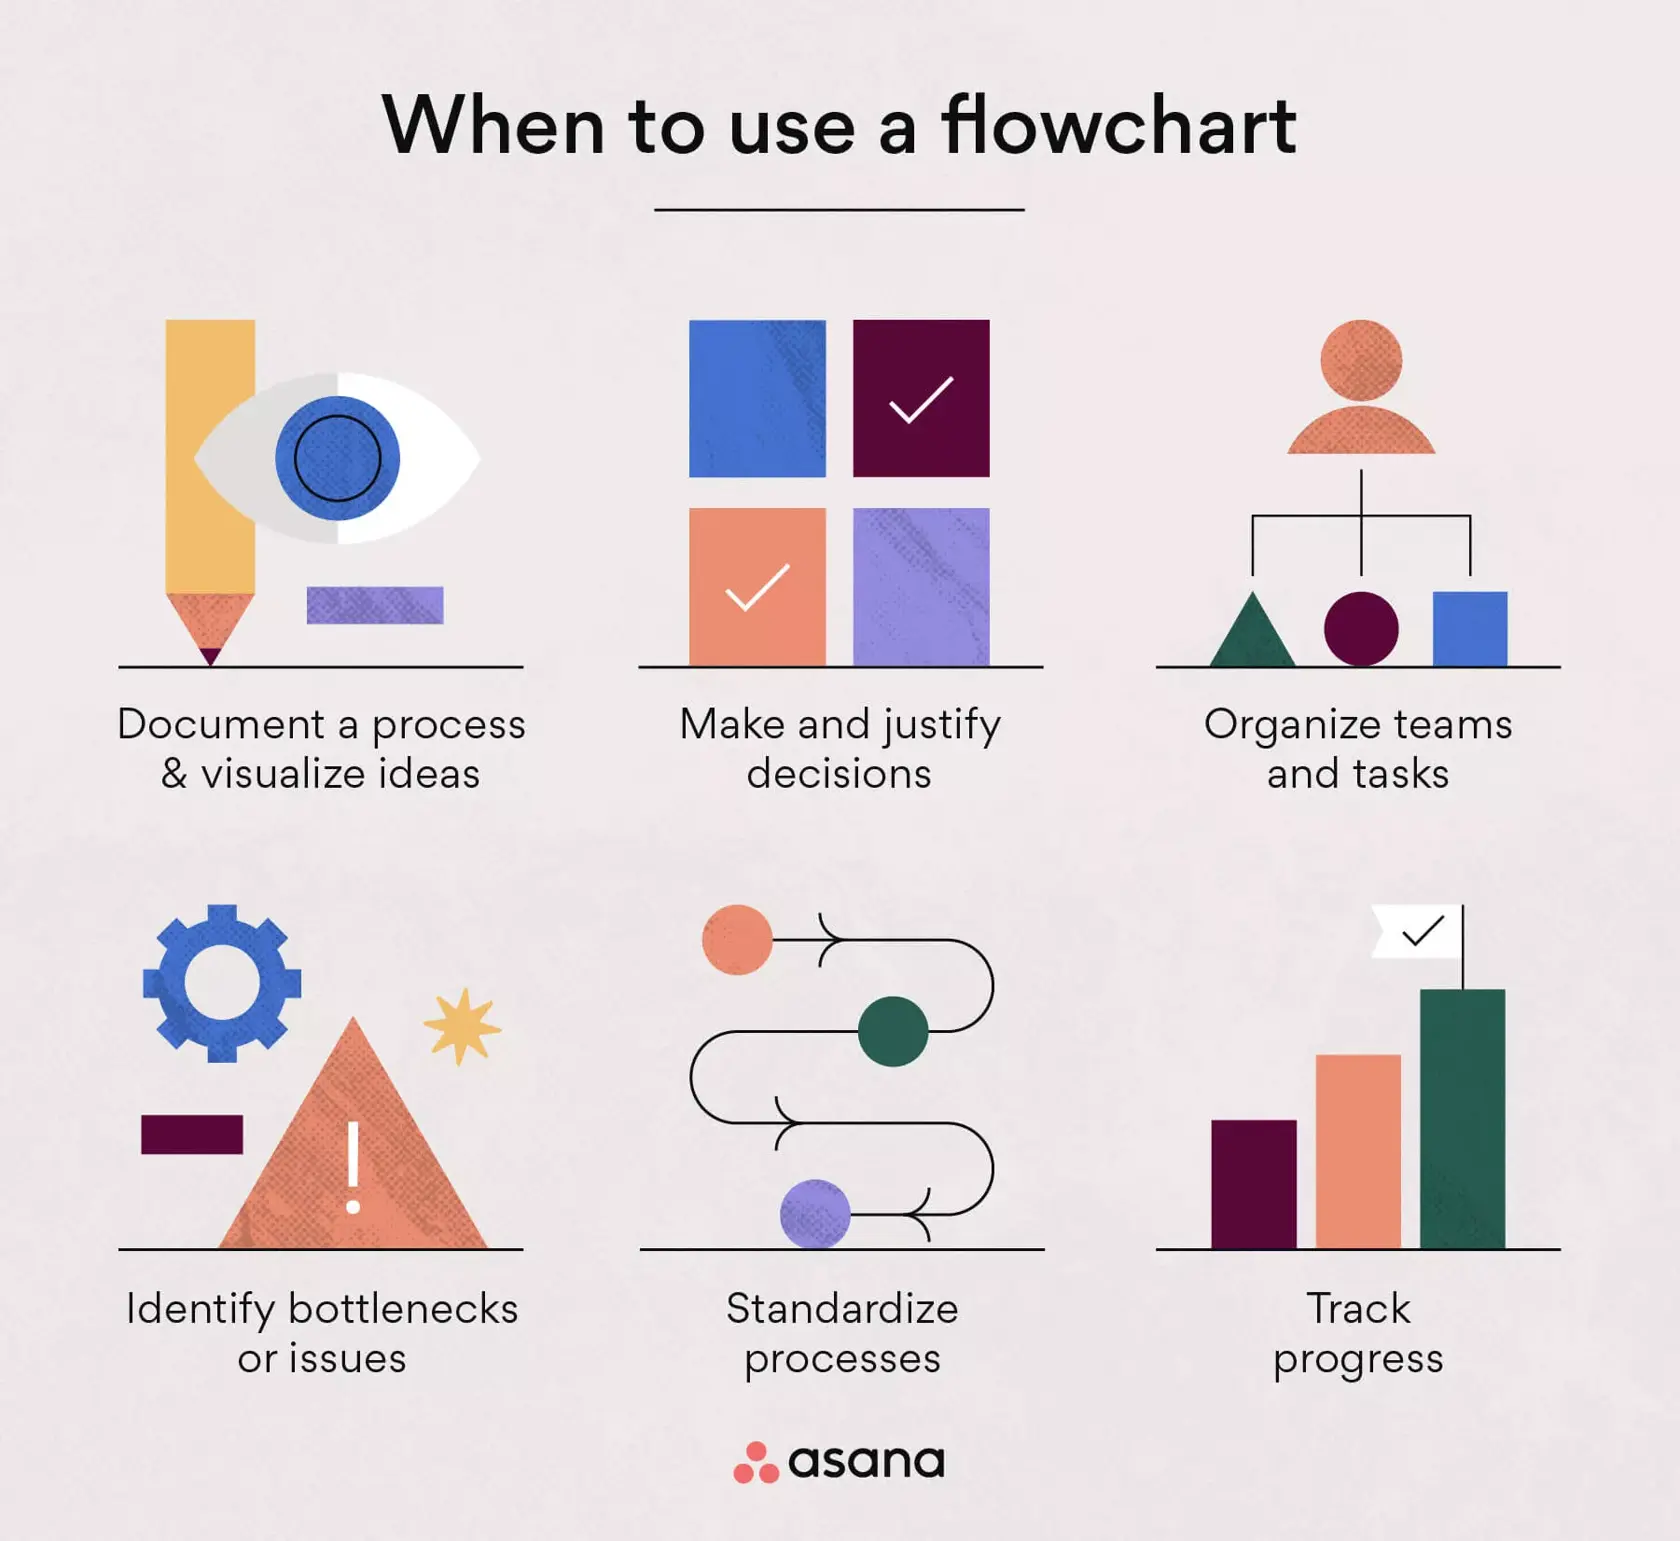 [inline illustration] When to use flowcharts (infographic)